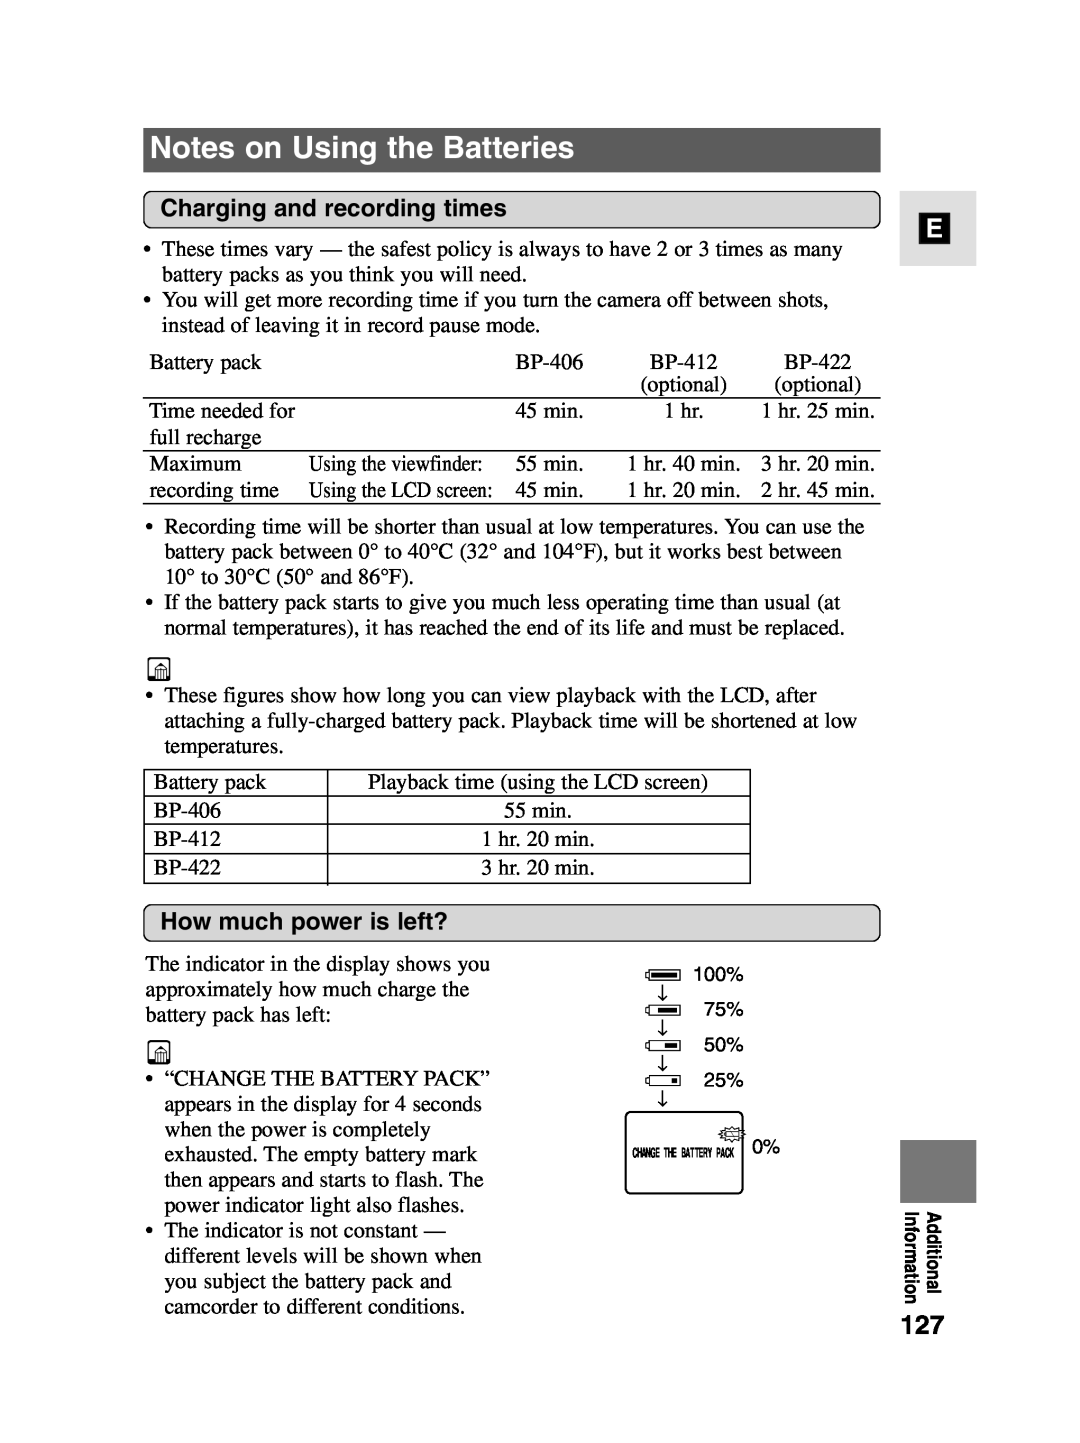 Canon MV4i MC instruction manual Notes on Using the Batteries, Charging and recording times, How much power is left? 